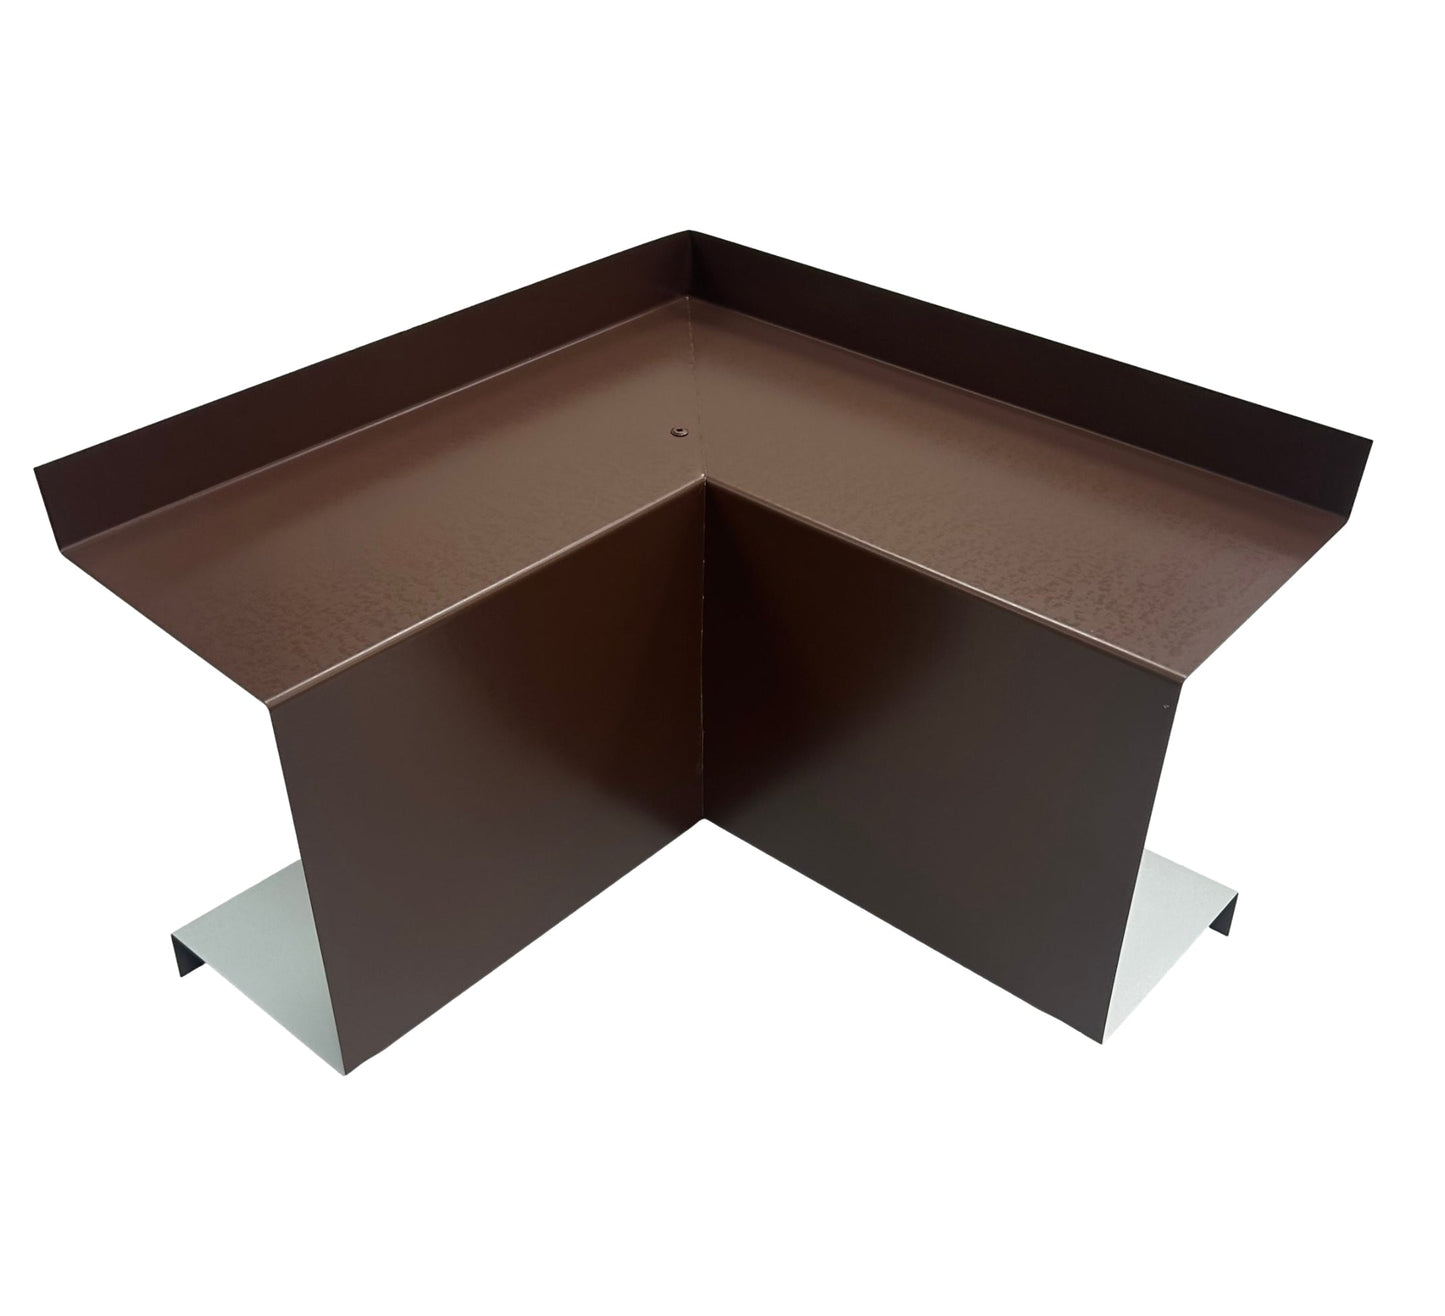 A brown L-shaped metal Perma Cover Residential Series - Line Set Cover Inside Corner Elbows - Premium Quality with a vertical section extending downwards, likely used for protecting or reinforcing the corners of walls or structures. The guard has a smooth surface and could be useful in HVAC installations, particularly for inside corner elbows. Placed on a white background.